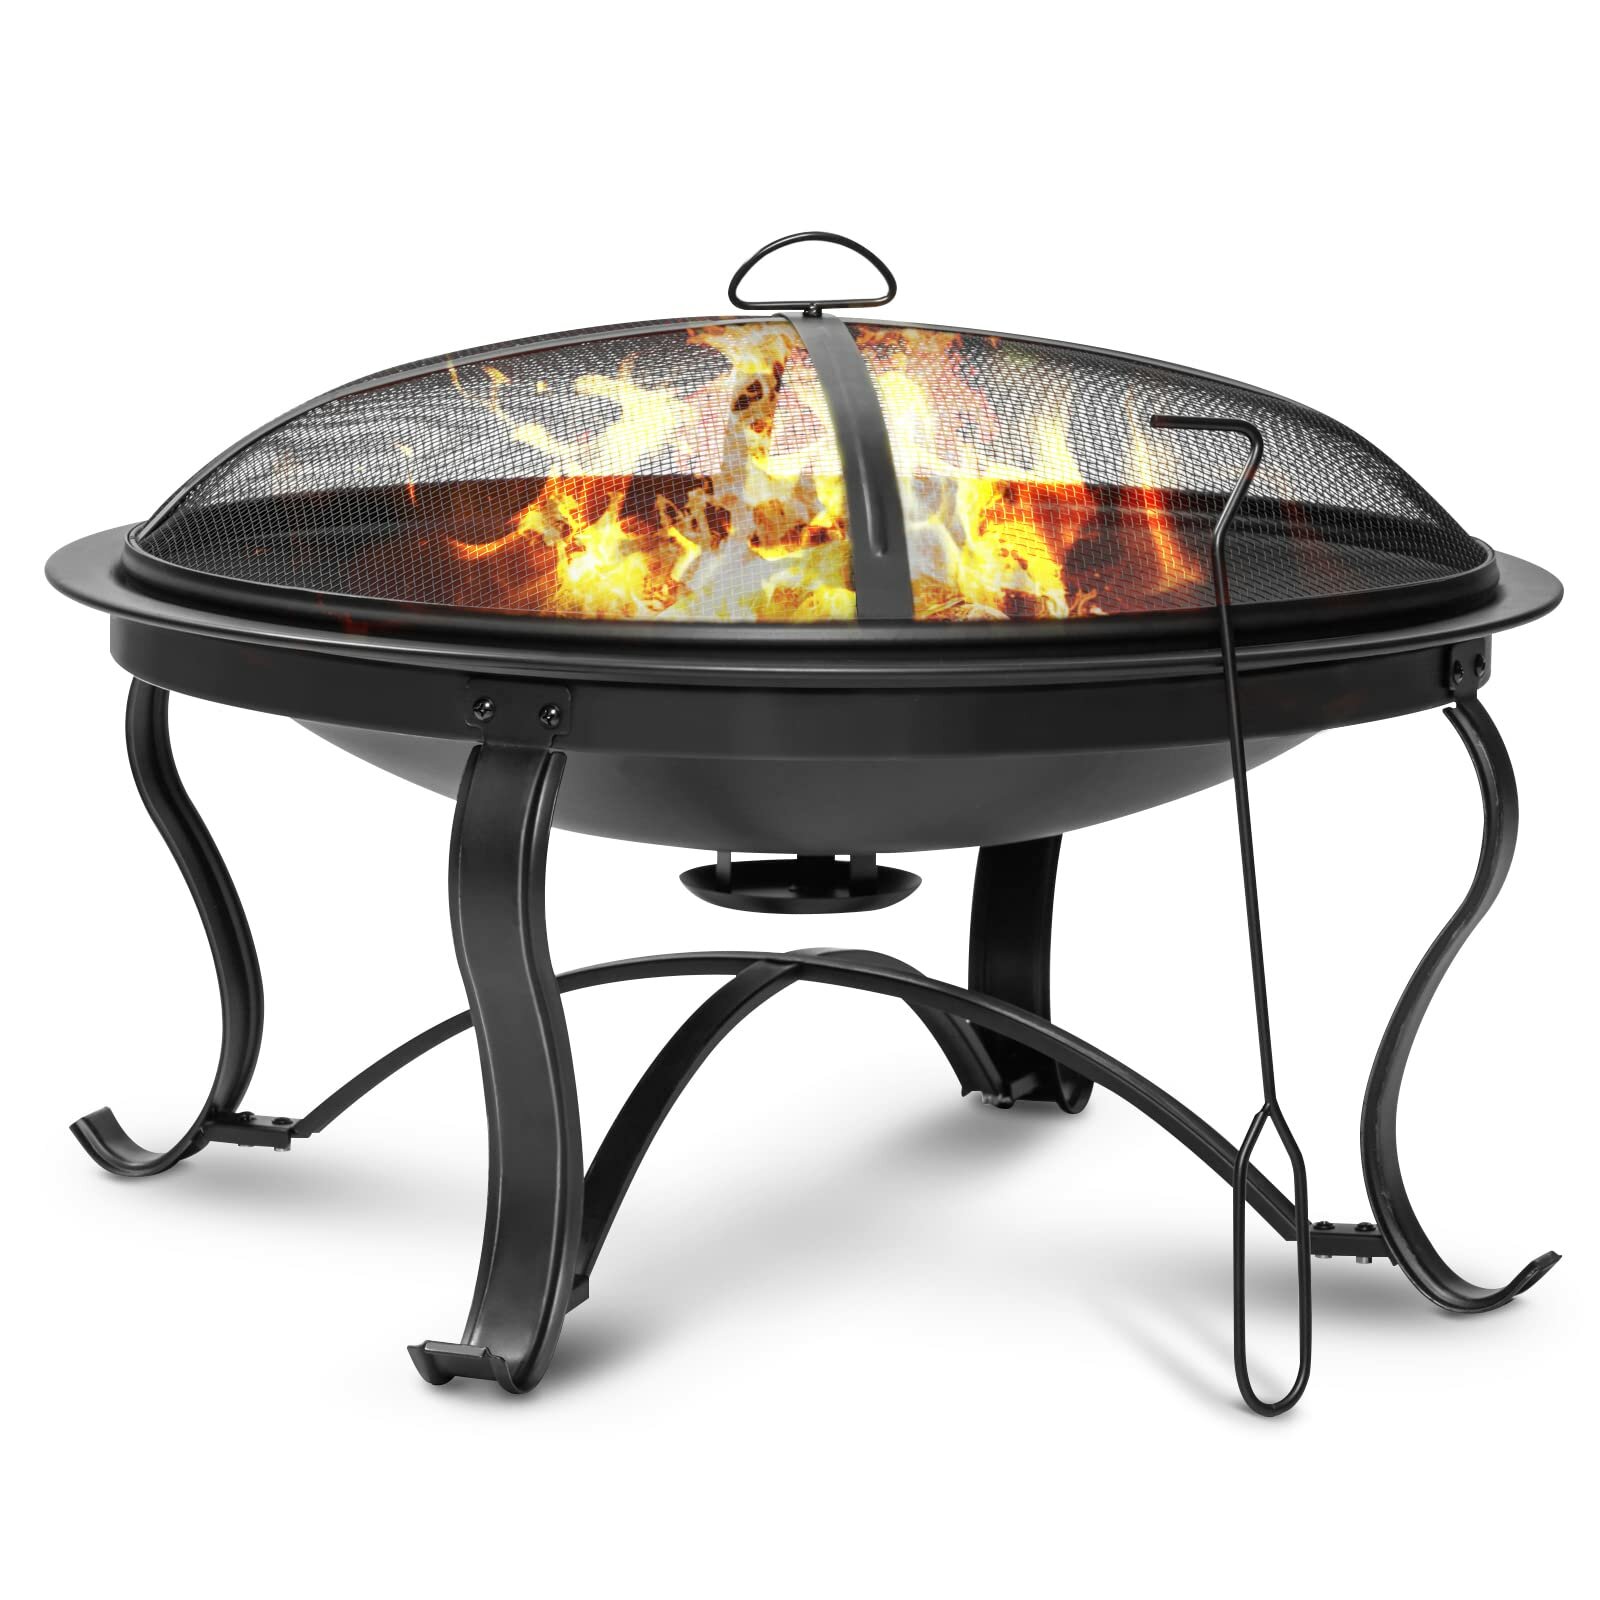 

SINGLYFIRE 29 inch Fire Pits for Outside Firepit Outdoor Wood Burning Pit Steel Firepit Bowl for Patio Backyard Camping